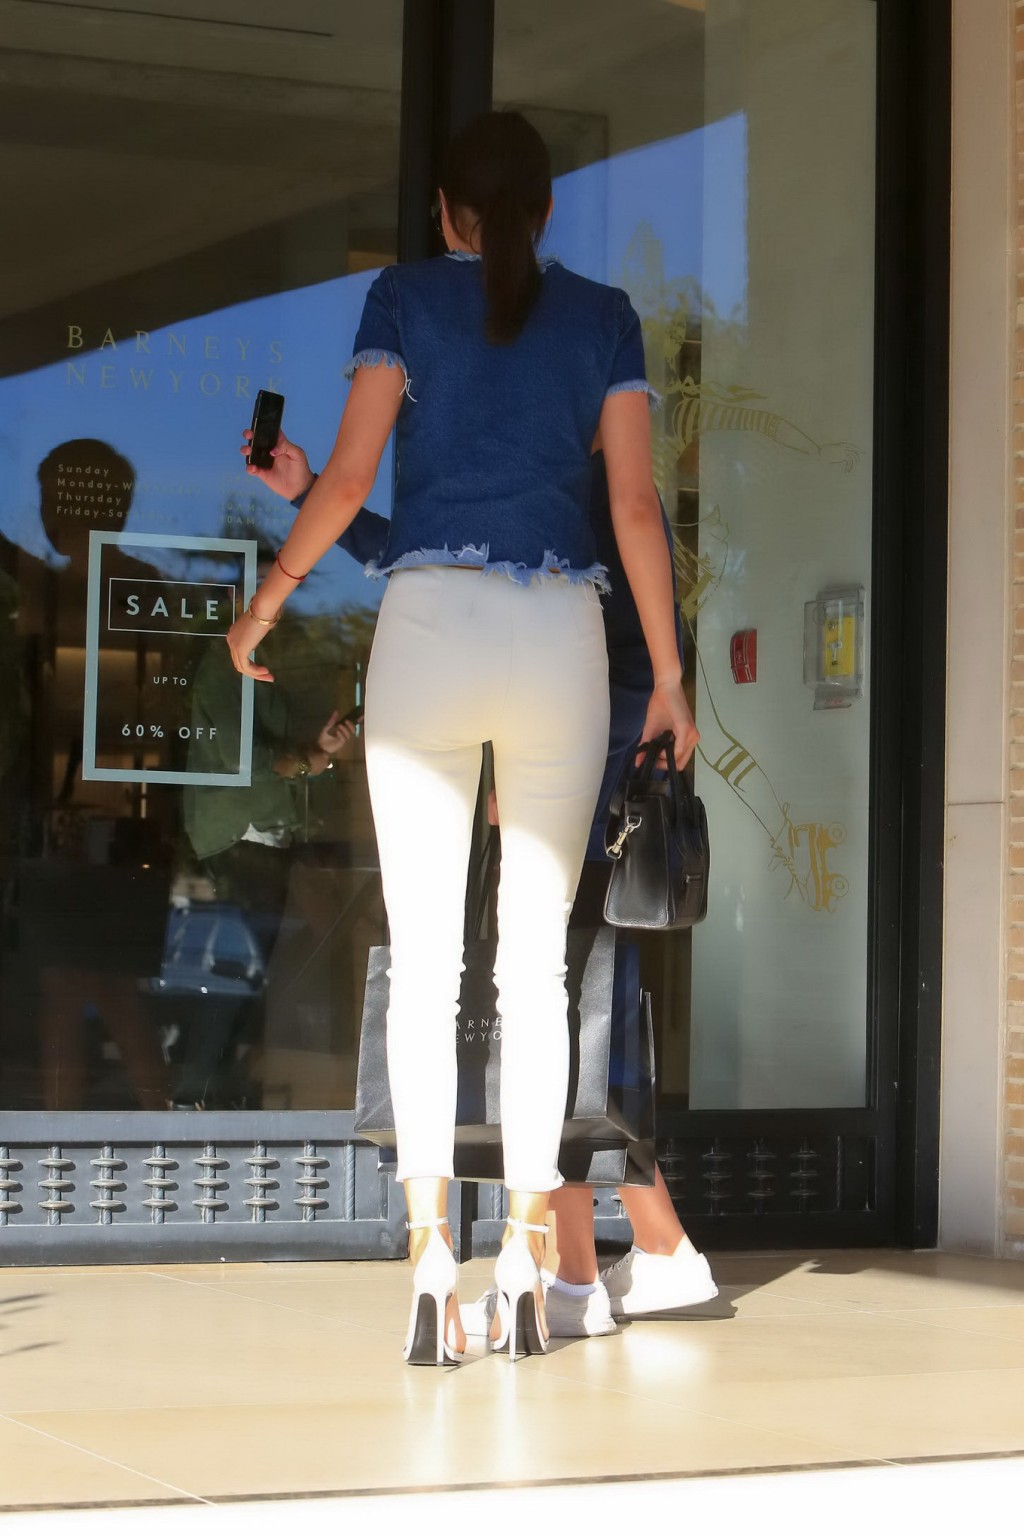 Kendall Jenner showing ass in tight white pants and denim top while shopping in  #75177167